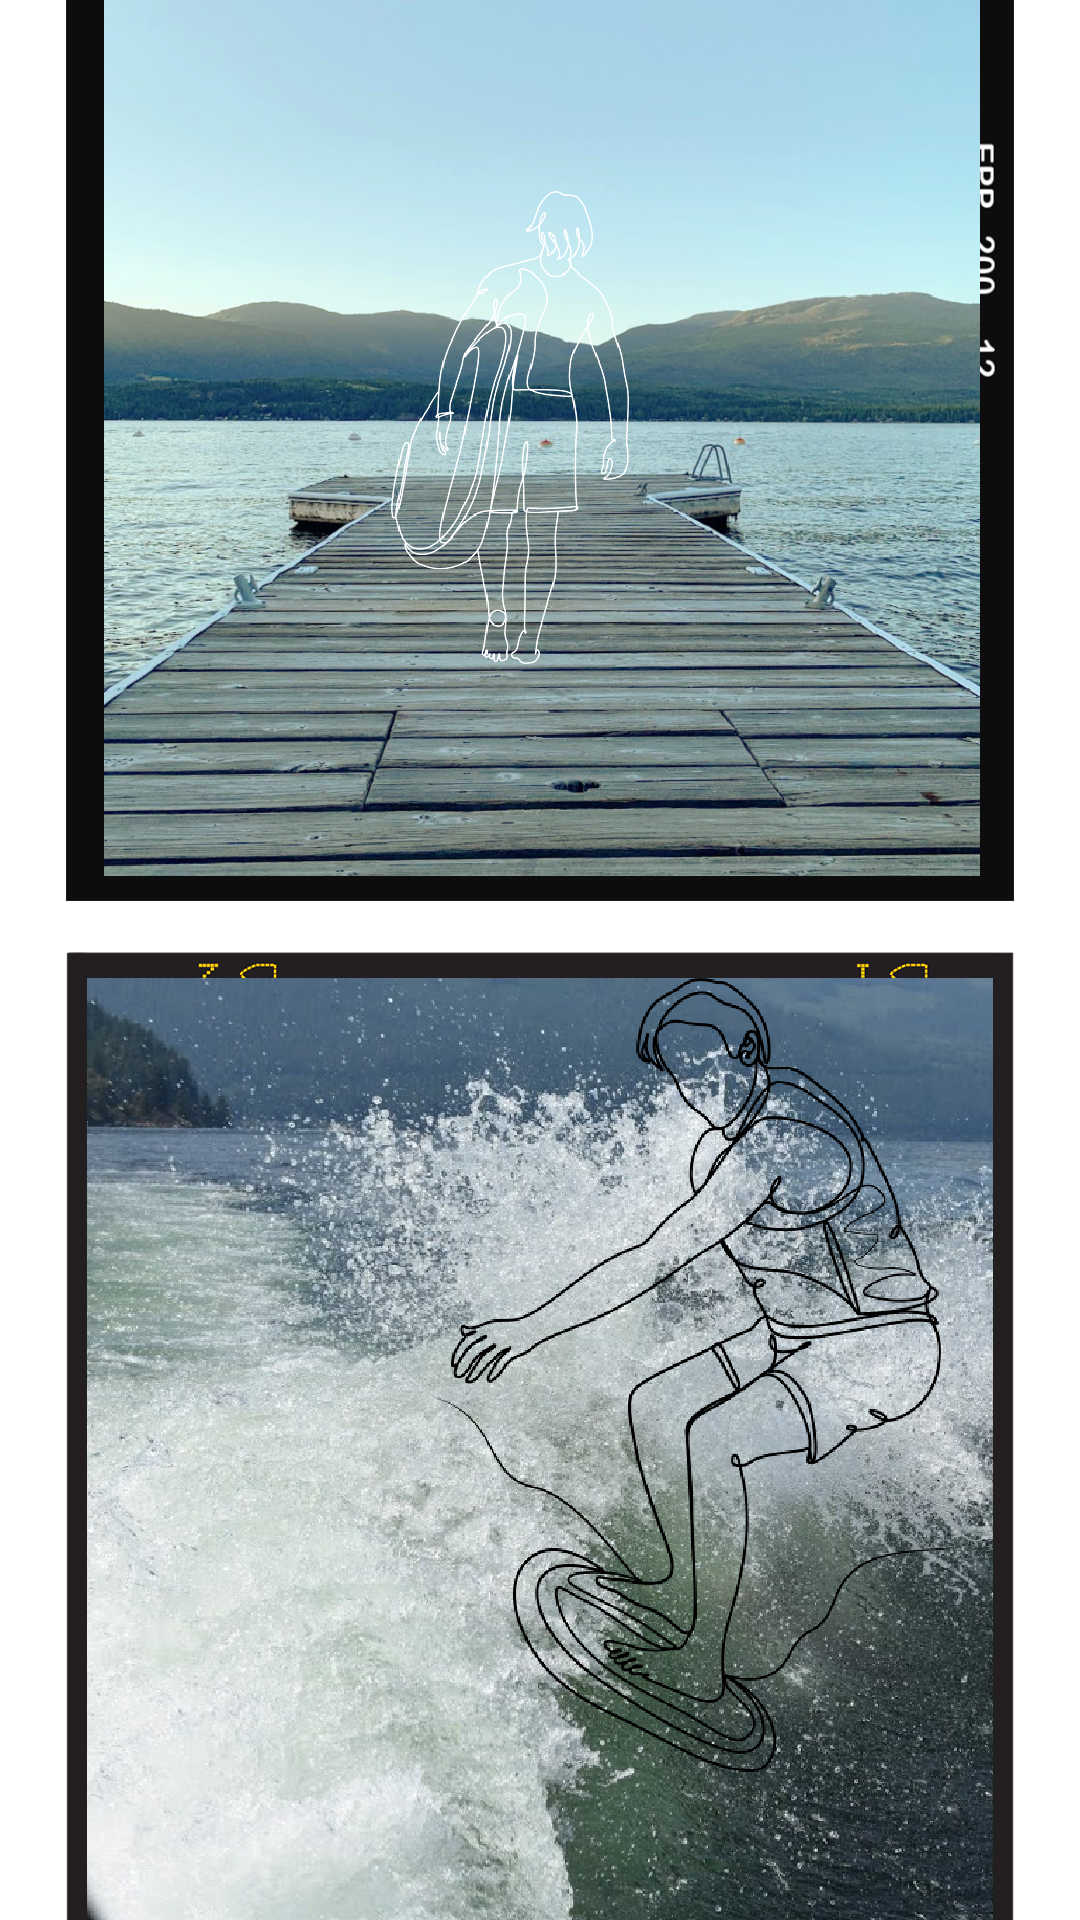 There are two film strip pictures in this image. The top one is of a dock on the water at Shuswap Lake with an illustration of a man walking with a paddleboard towards the lake. The second image is of the wake behind a boat on Shuswap Lake with an illustration of a man surfing.